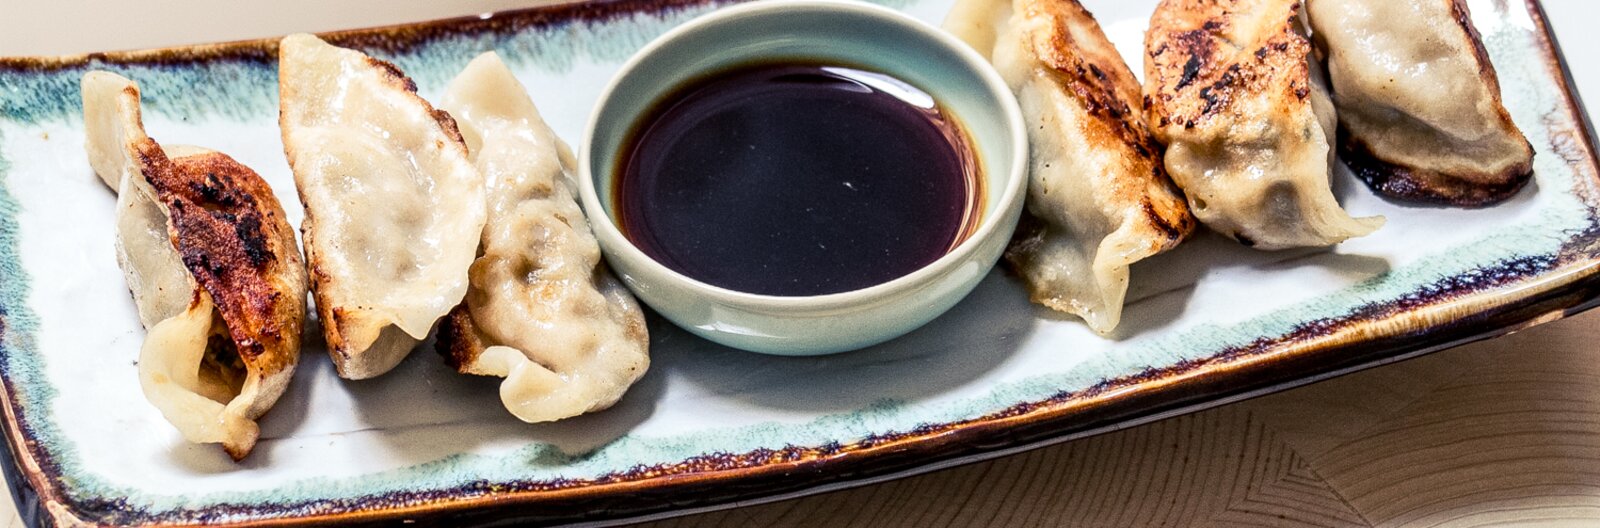 Worldly Tastes: 9 great spots to eat Japanese food in Budapest